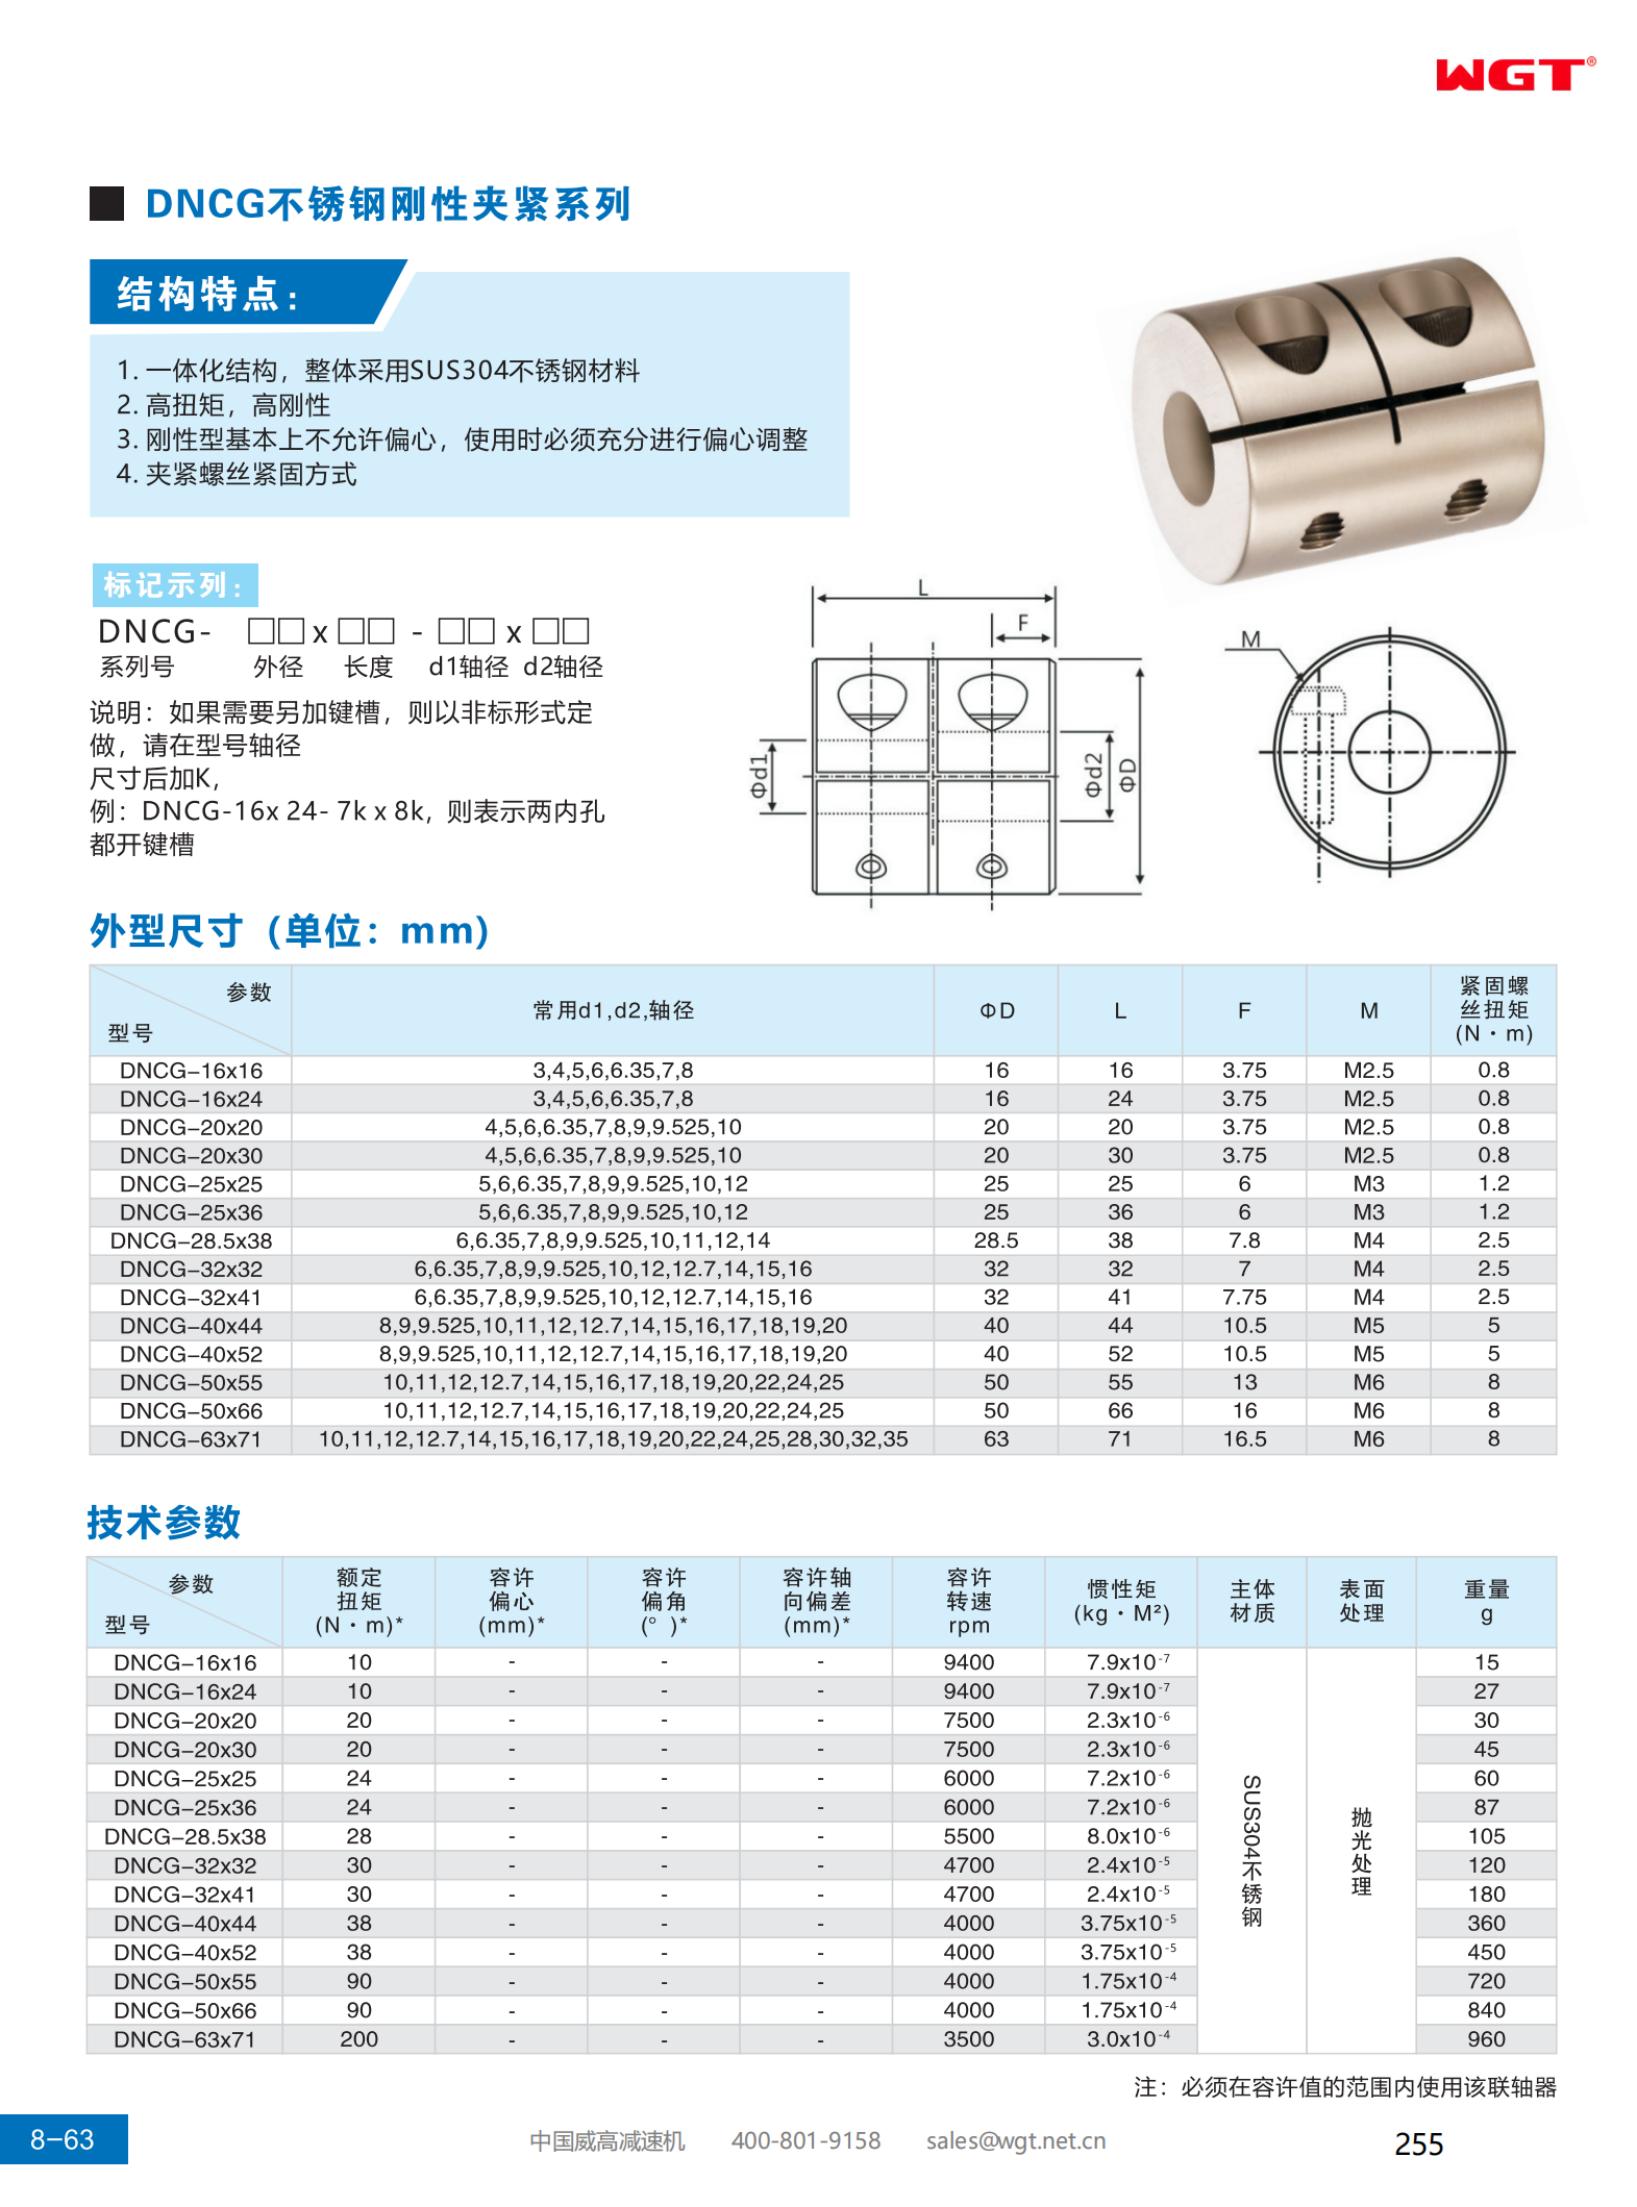 DNCG stainless steel rigid clamping series